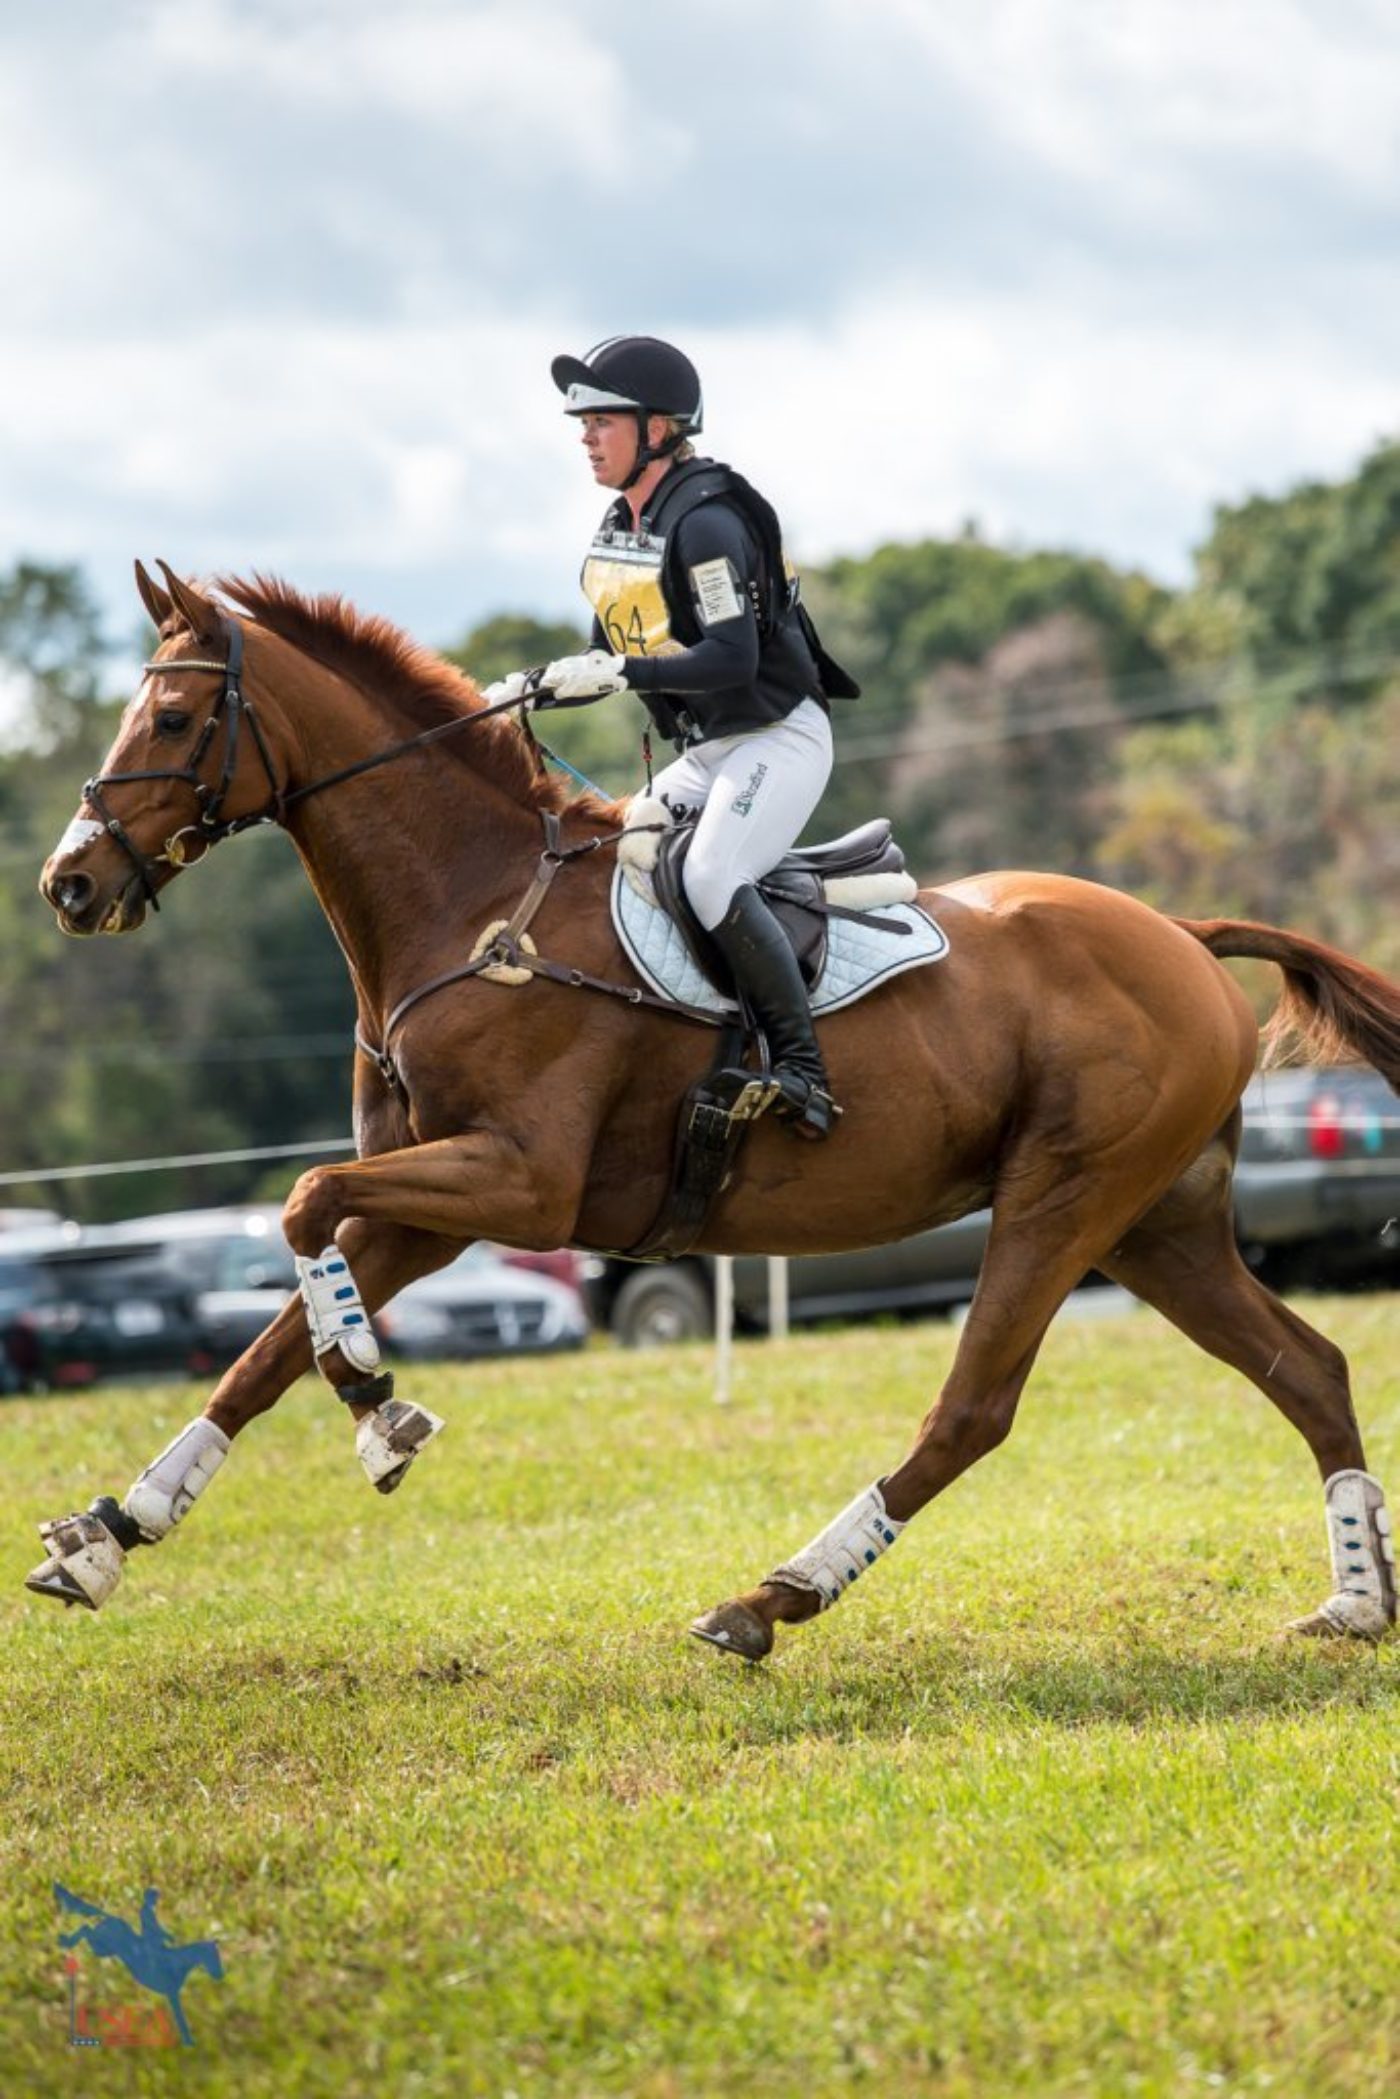 Anna Loschiavo and Spartacus Q moving quickly across the country. USEA/Jessica Duffy Photo.